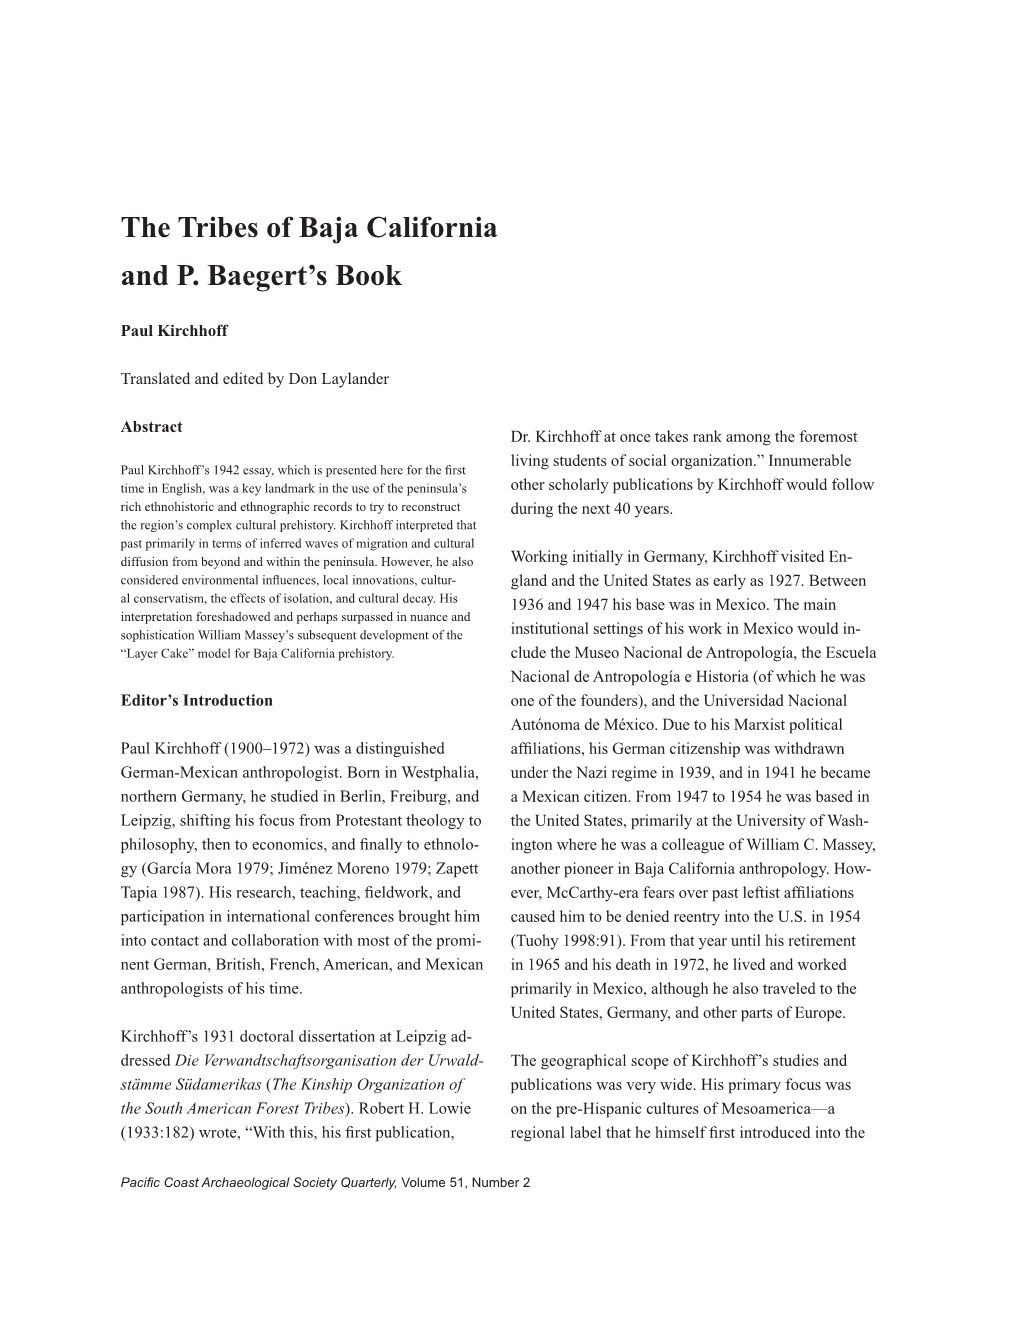 The Tribes of Baja California and P. Baegert's Book